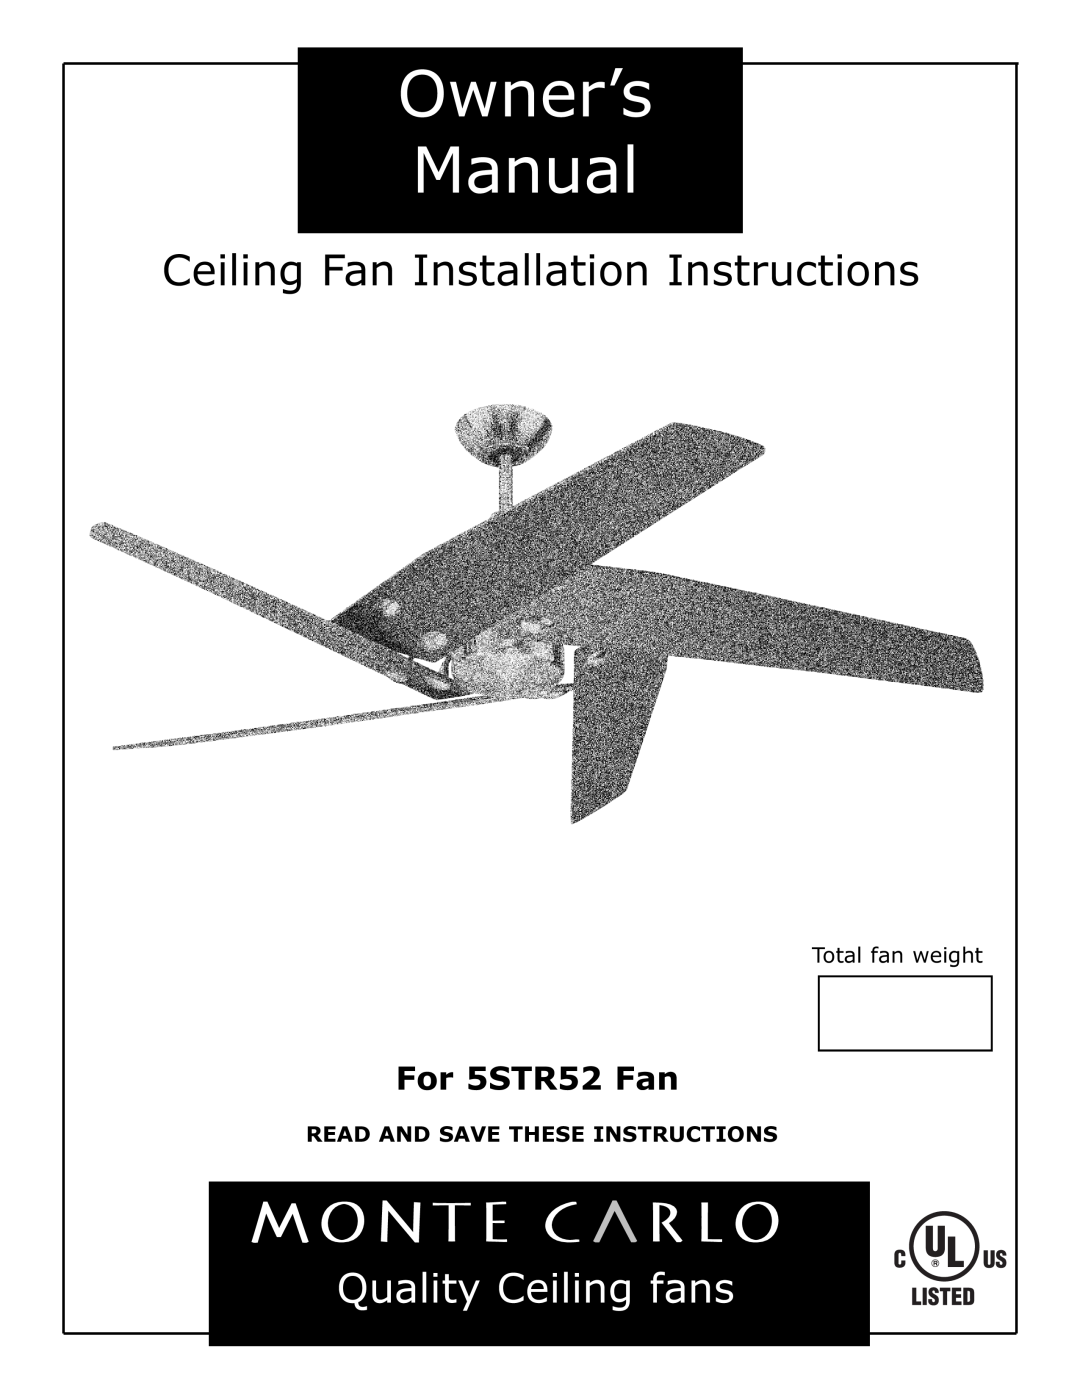 Monte Carlo Fan Company 5STR52 owner manual Read And Save These Instructions, Ceiling Fan Installation Instructions 